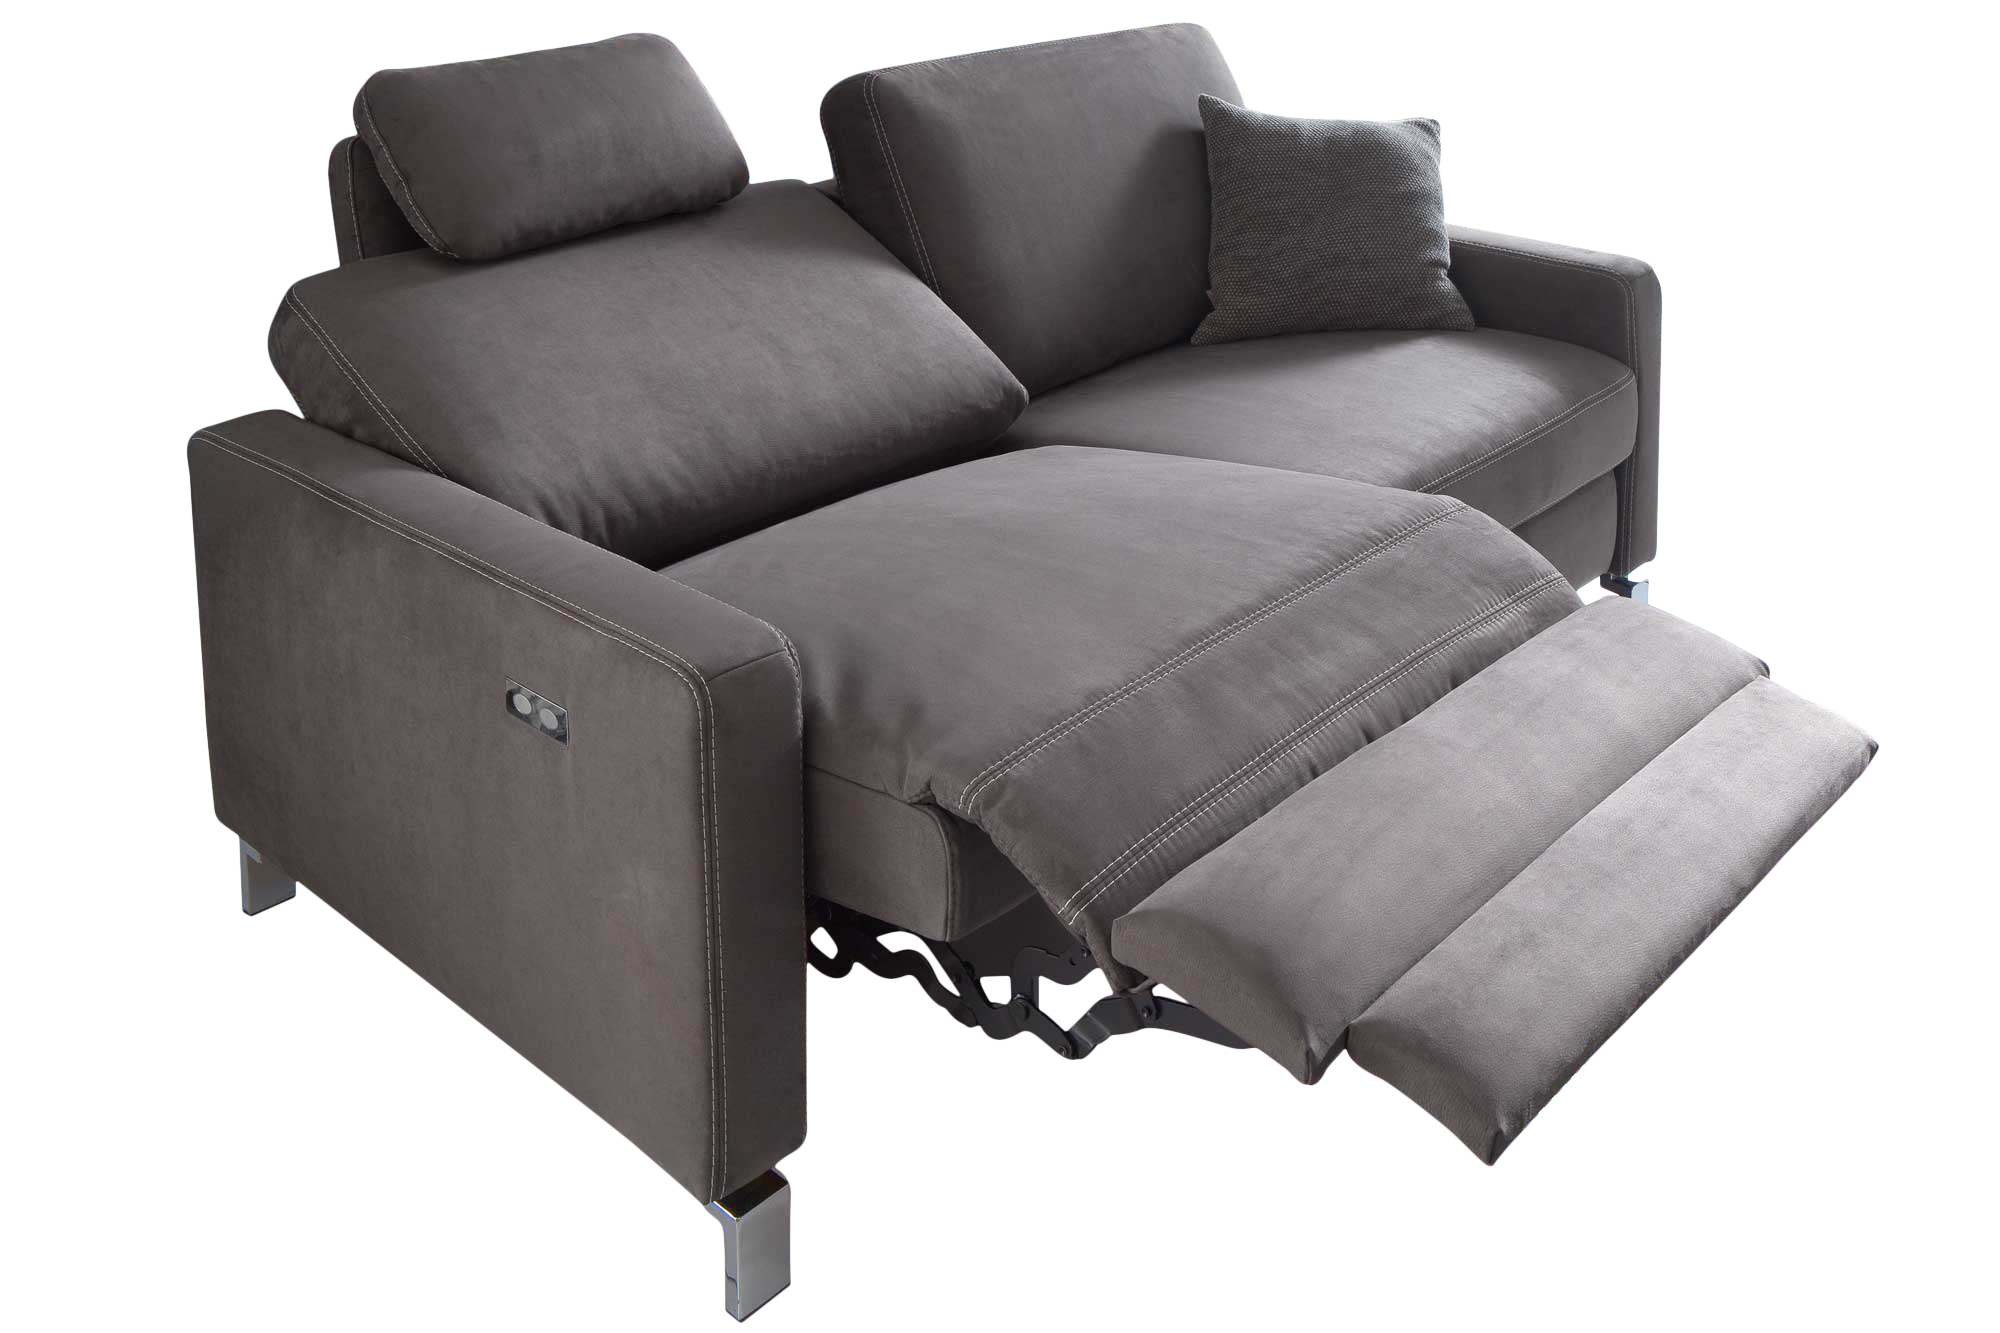 Candy Konfigurator Sofa Coast Plus mit Relaxfunktion